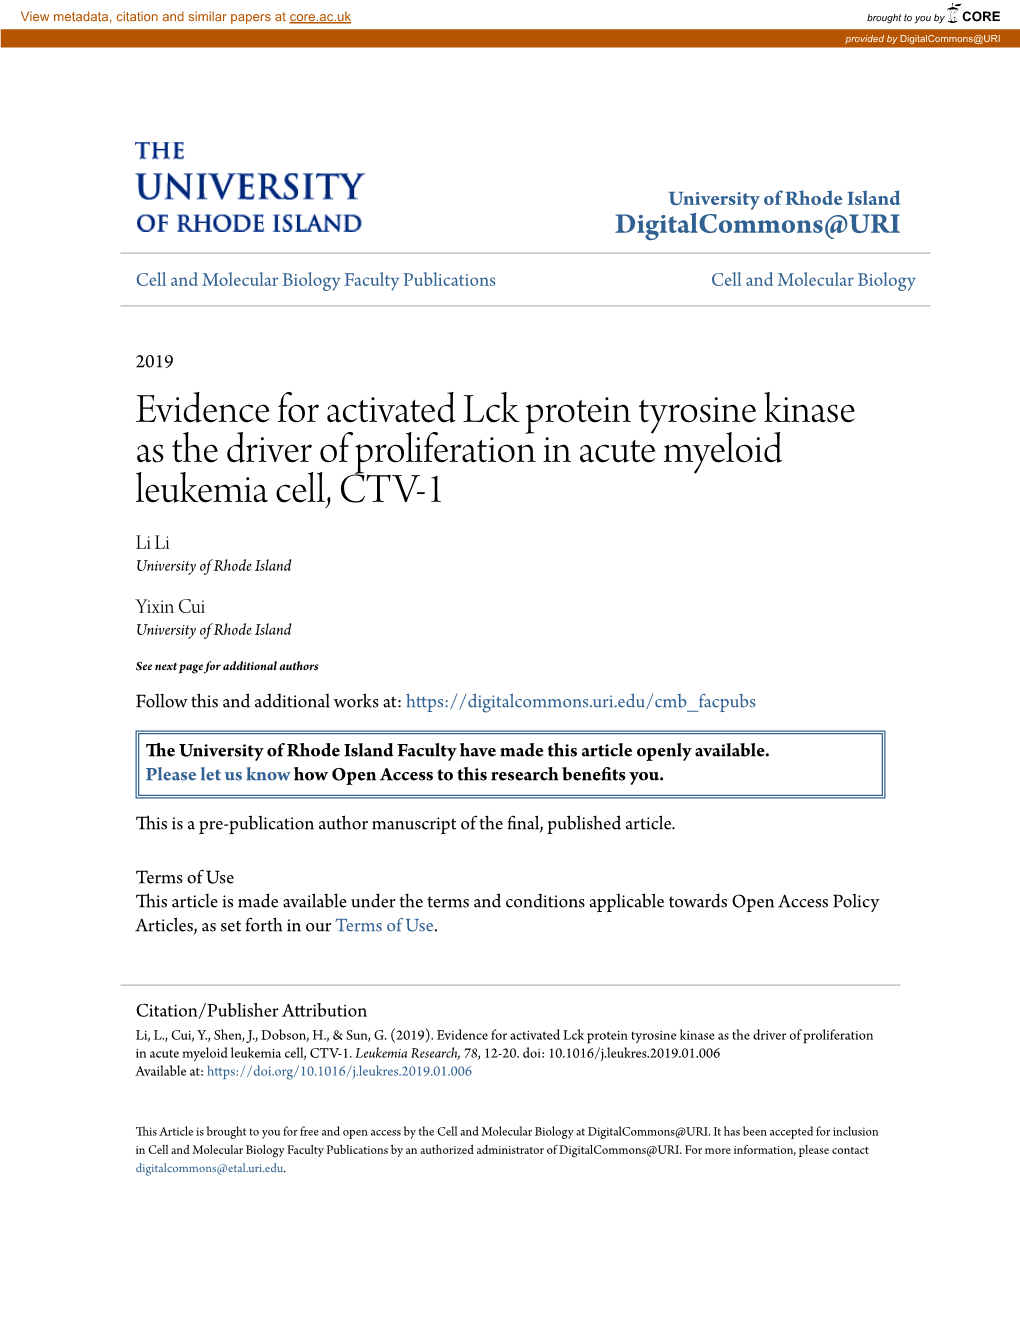 Evidence for Activated Lck Protein Tyrosine Kinase As the Driver of Proliferation in Acute Myeloid Leukemia Cell, CTV-1 Li Li University of Rhode Island